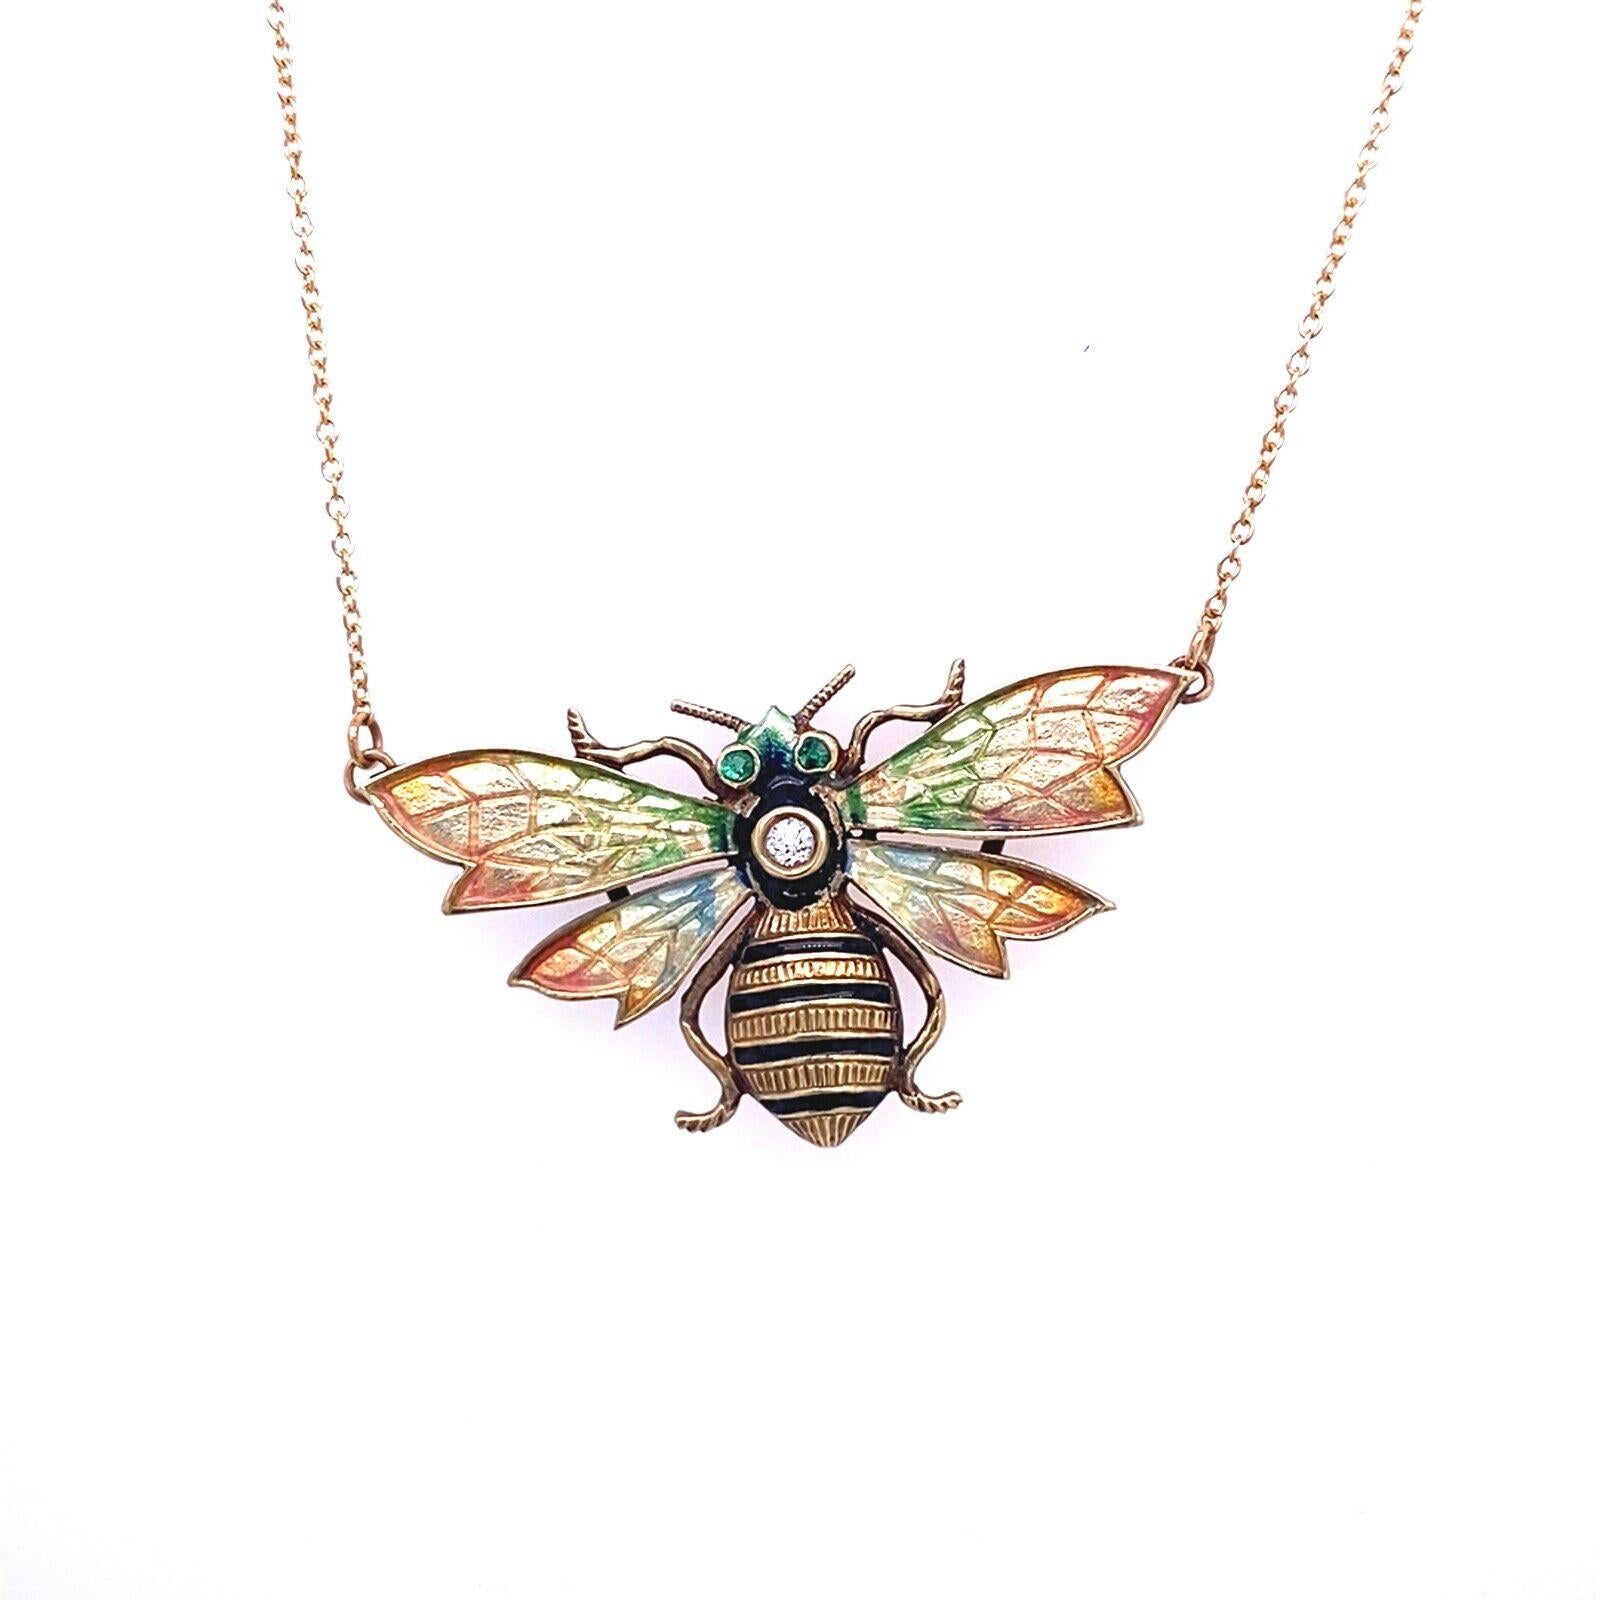 Enamelled Diamond & Emerald Bumble Bee Pendant on 18ct Yellow Gold Chain

This beautiful enameled bumble bee pendant is mounted on a sparkling diamond and emeralds setting. It is suspended from a delicate 18ct yellow gold chain. The butterfly isn't